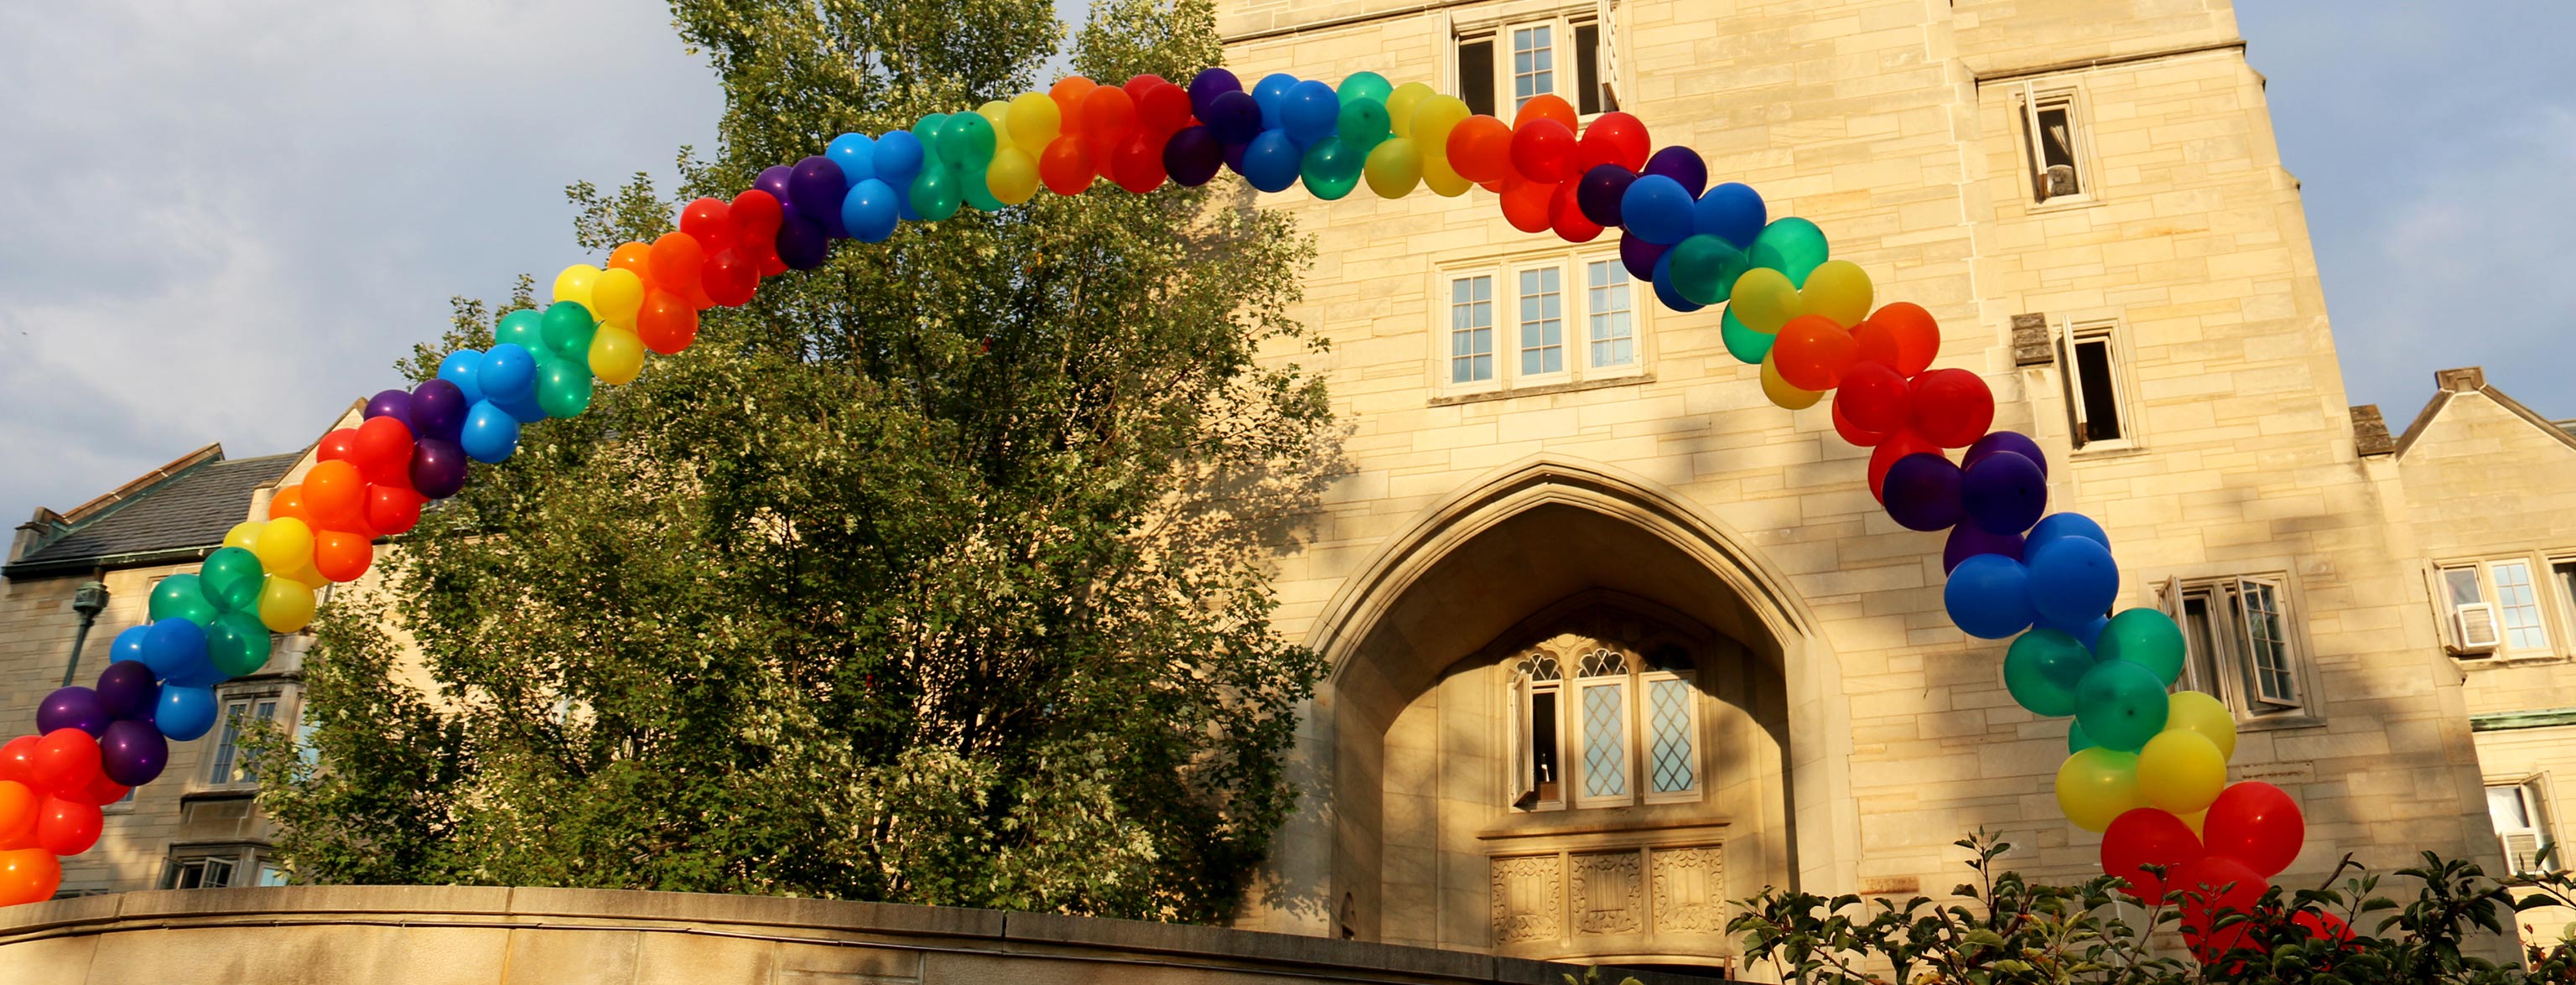 Massive rainbow balloon arch in front of the entrance to the Collins Center